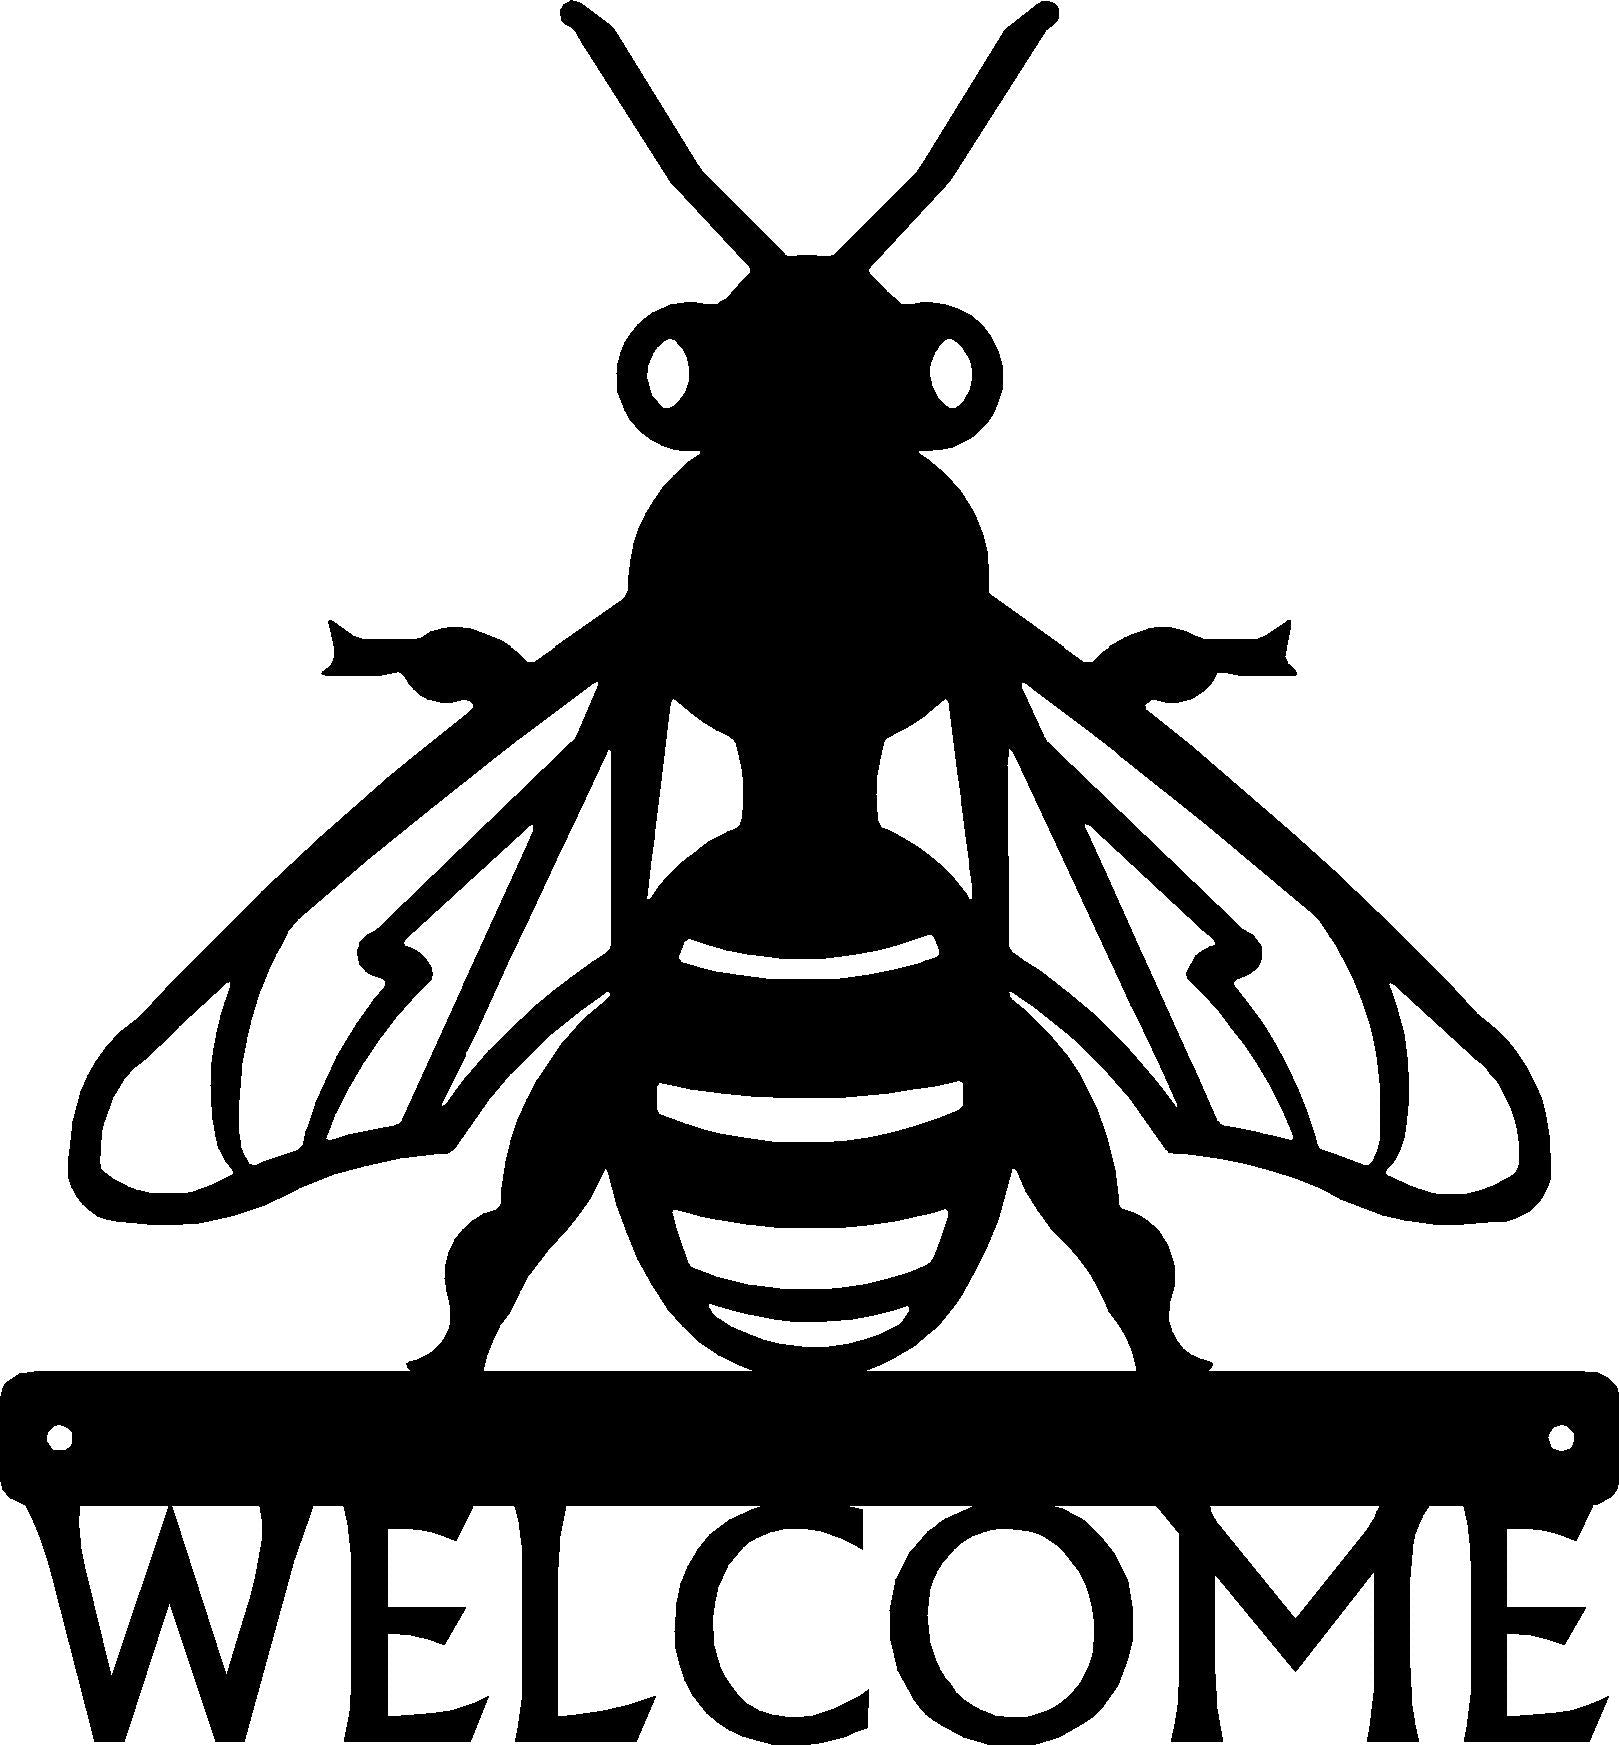 Honey Bee Welcome Sign - The Metal Peddler Welcome Signs bee, farm, honey bee, porch, welcome sign